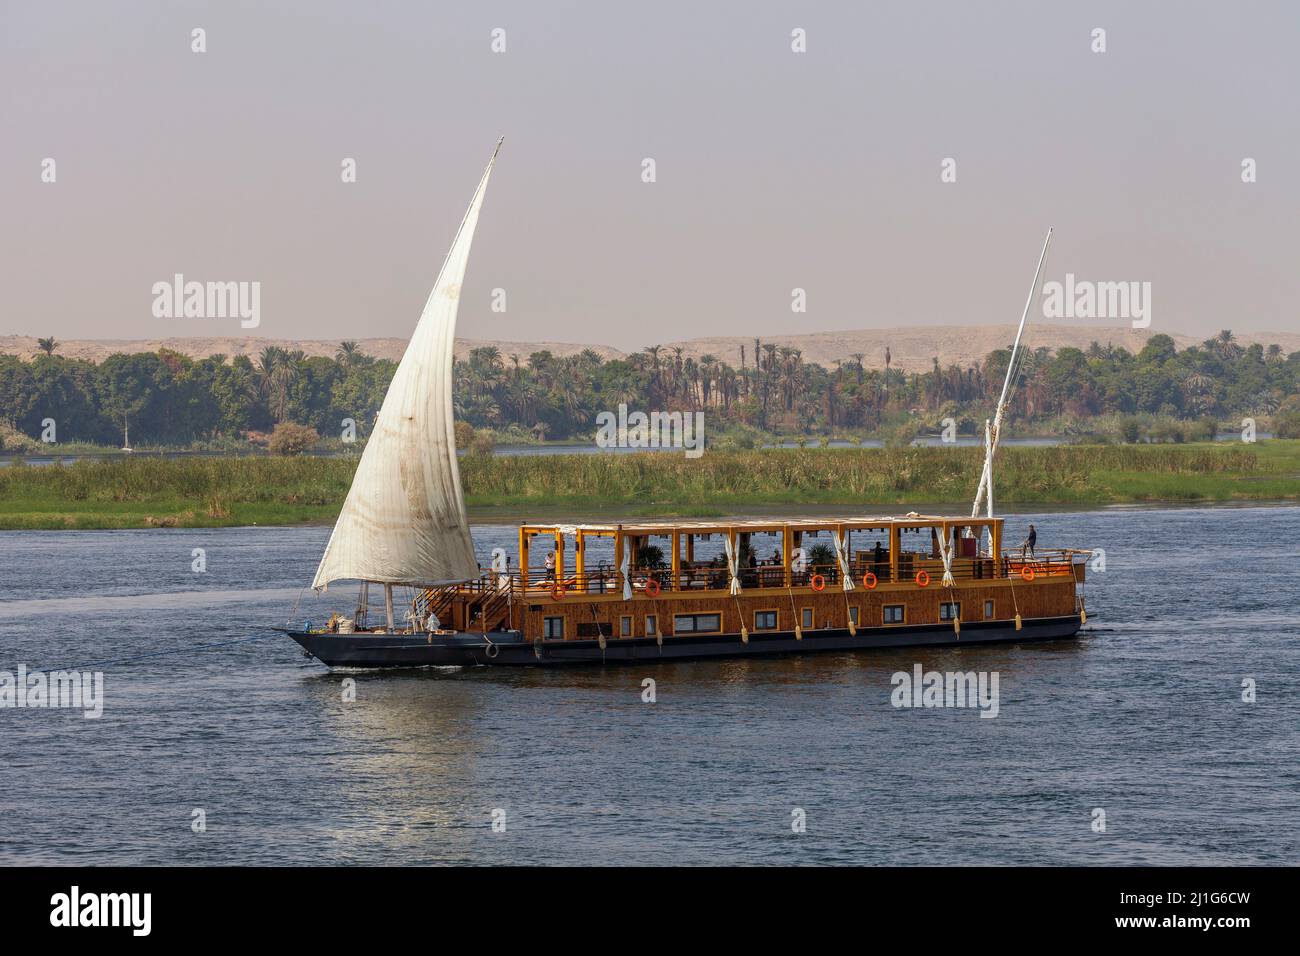 Traditional sailing boat on the Nile Stock Photo